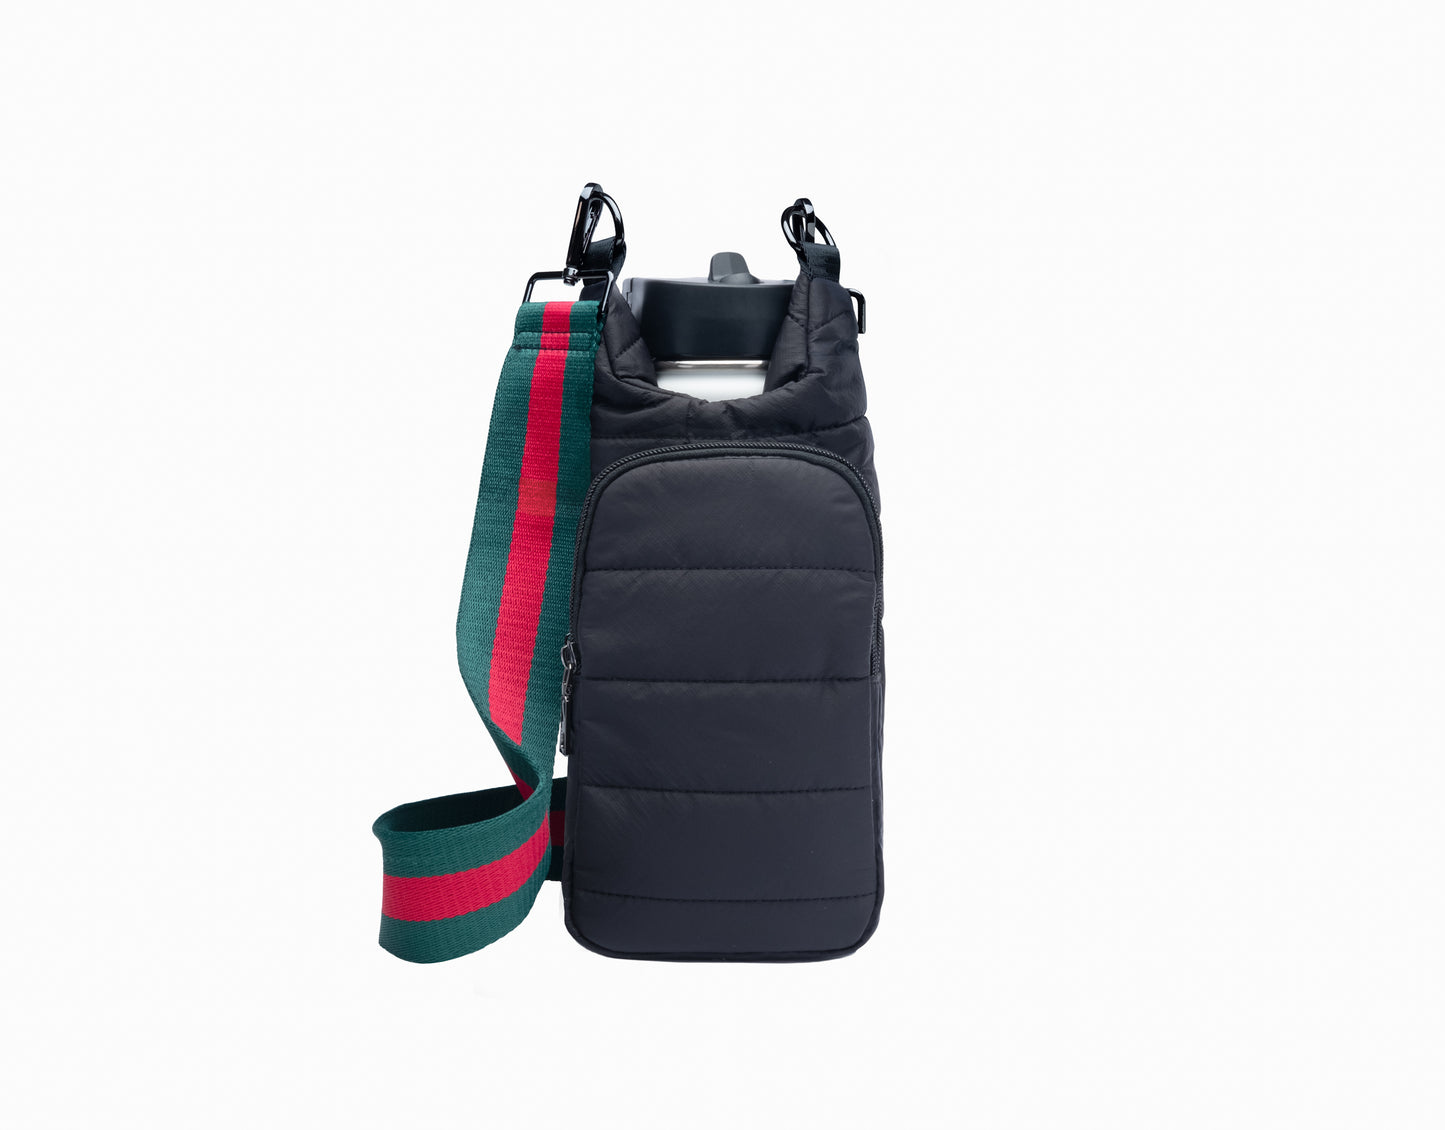 Black Matte HydroBag with Red/Green Strap